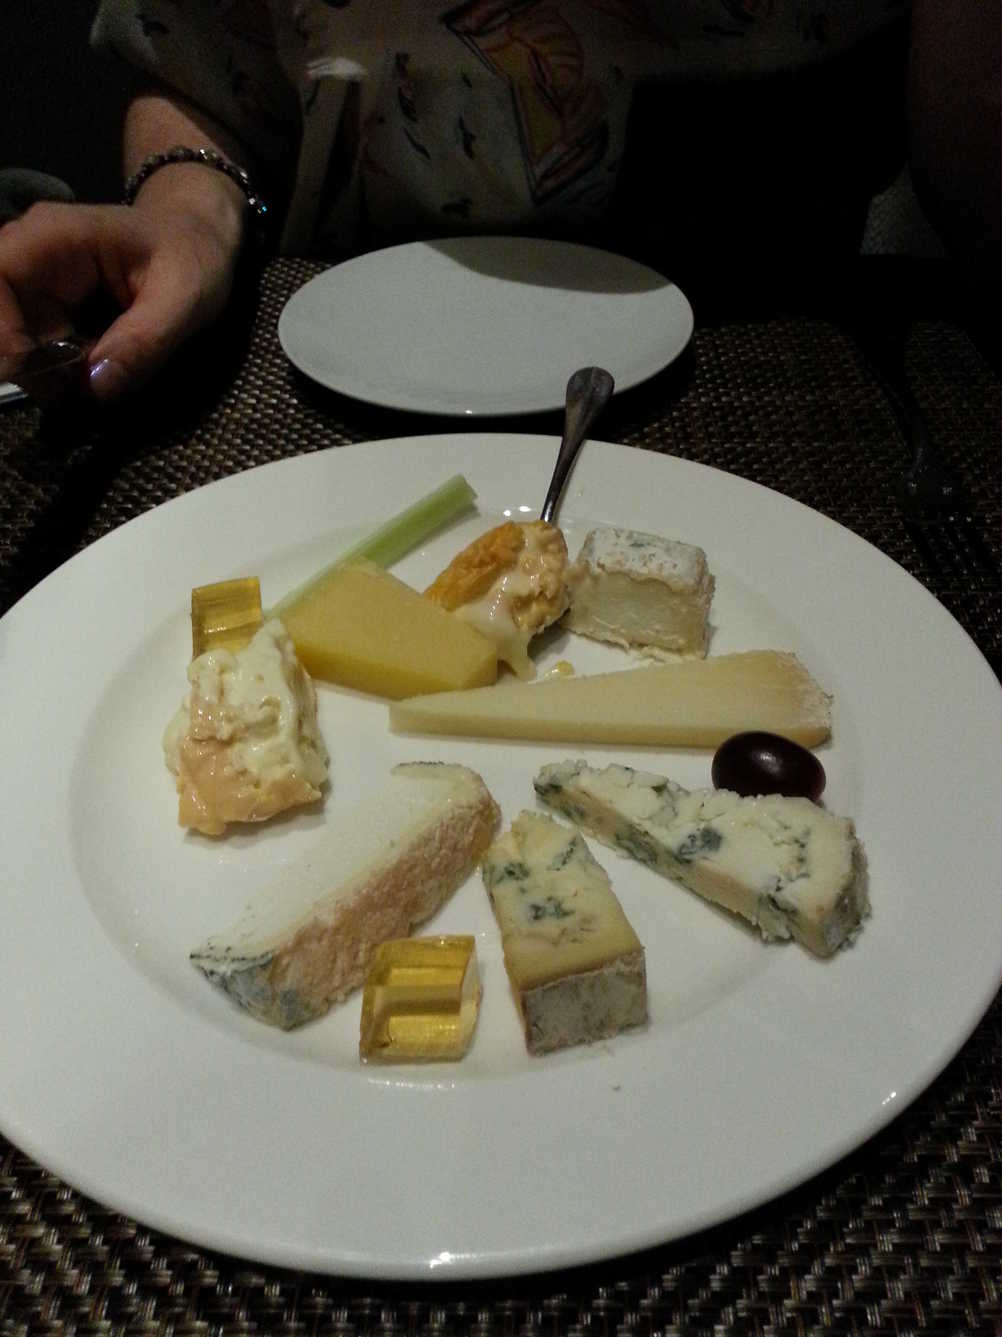 The cheese plate.